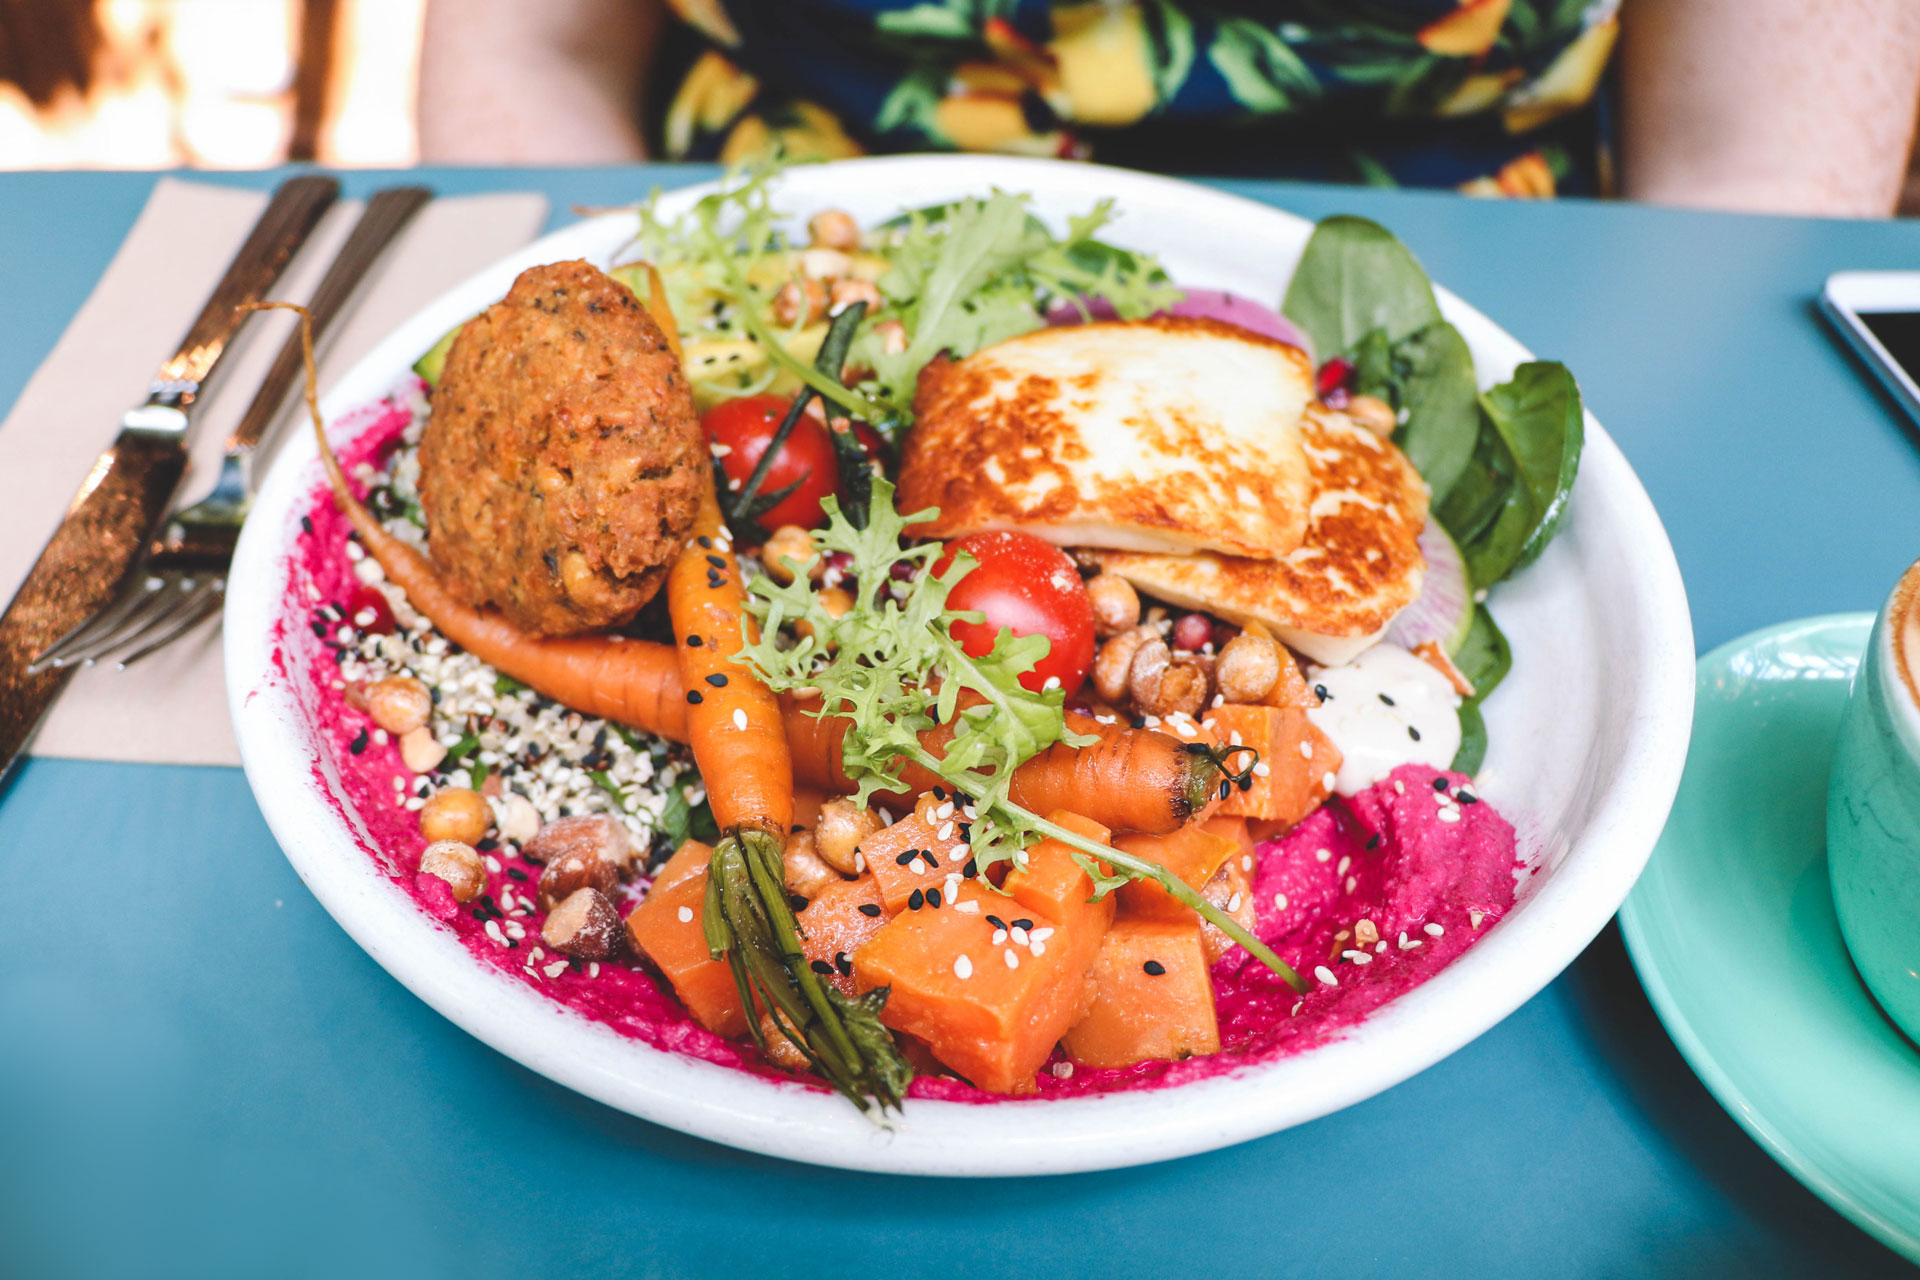 Review: Flower Child Chatswood - The Vegan Bowl